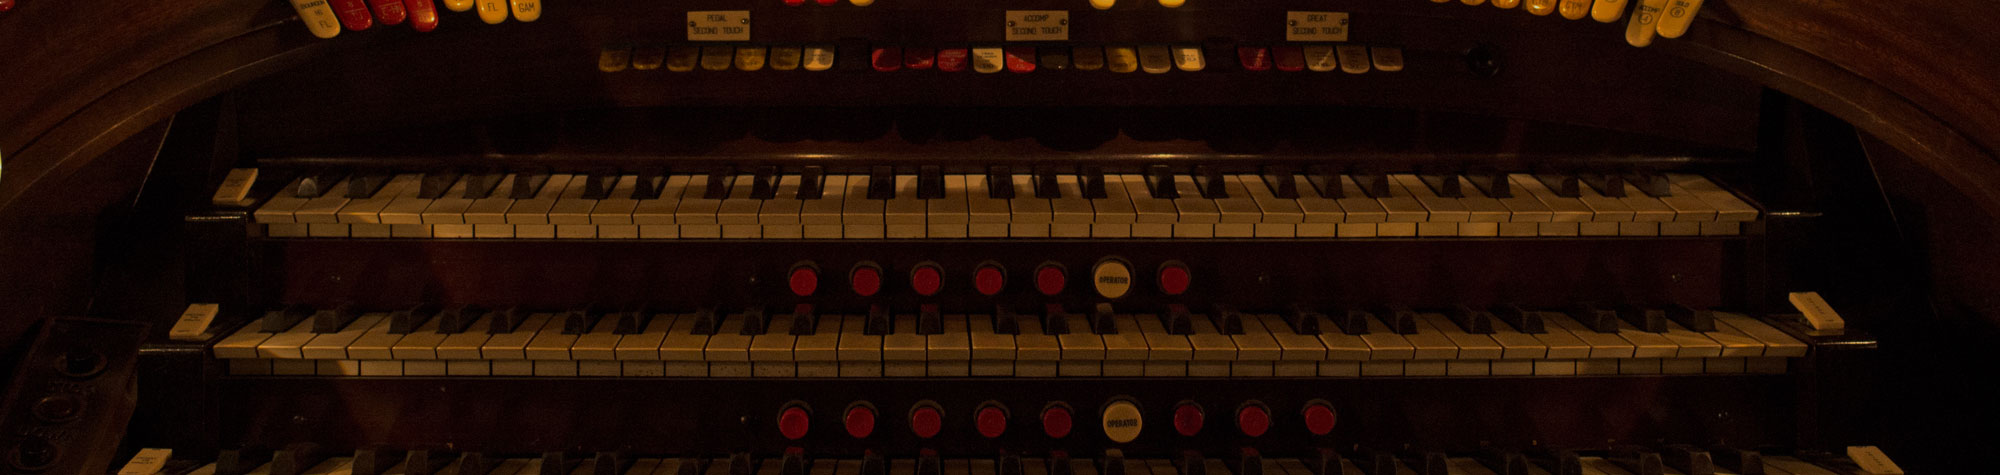 The Theater Organ: Then and Now